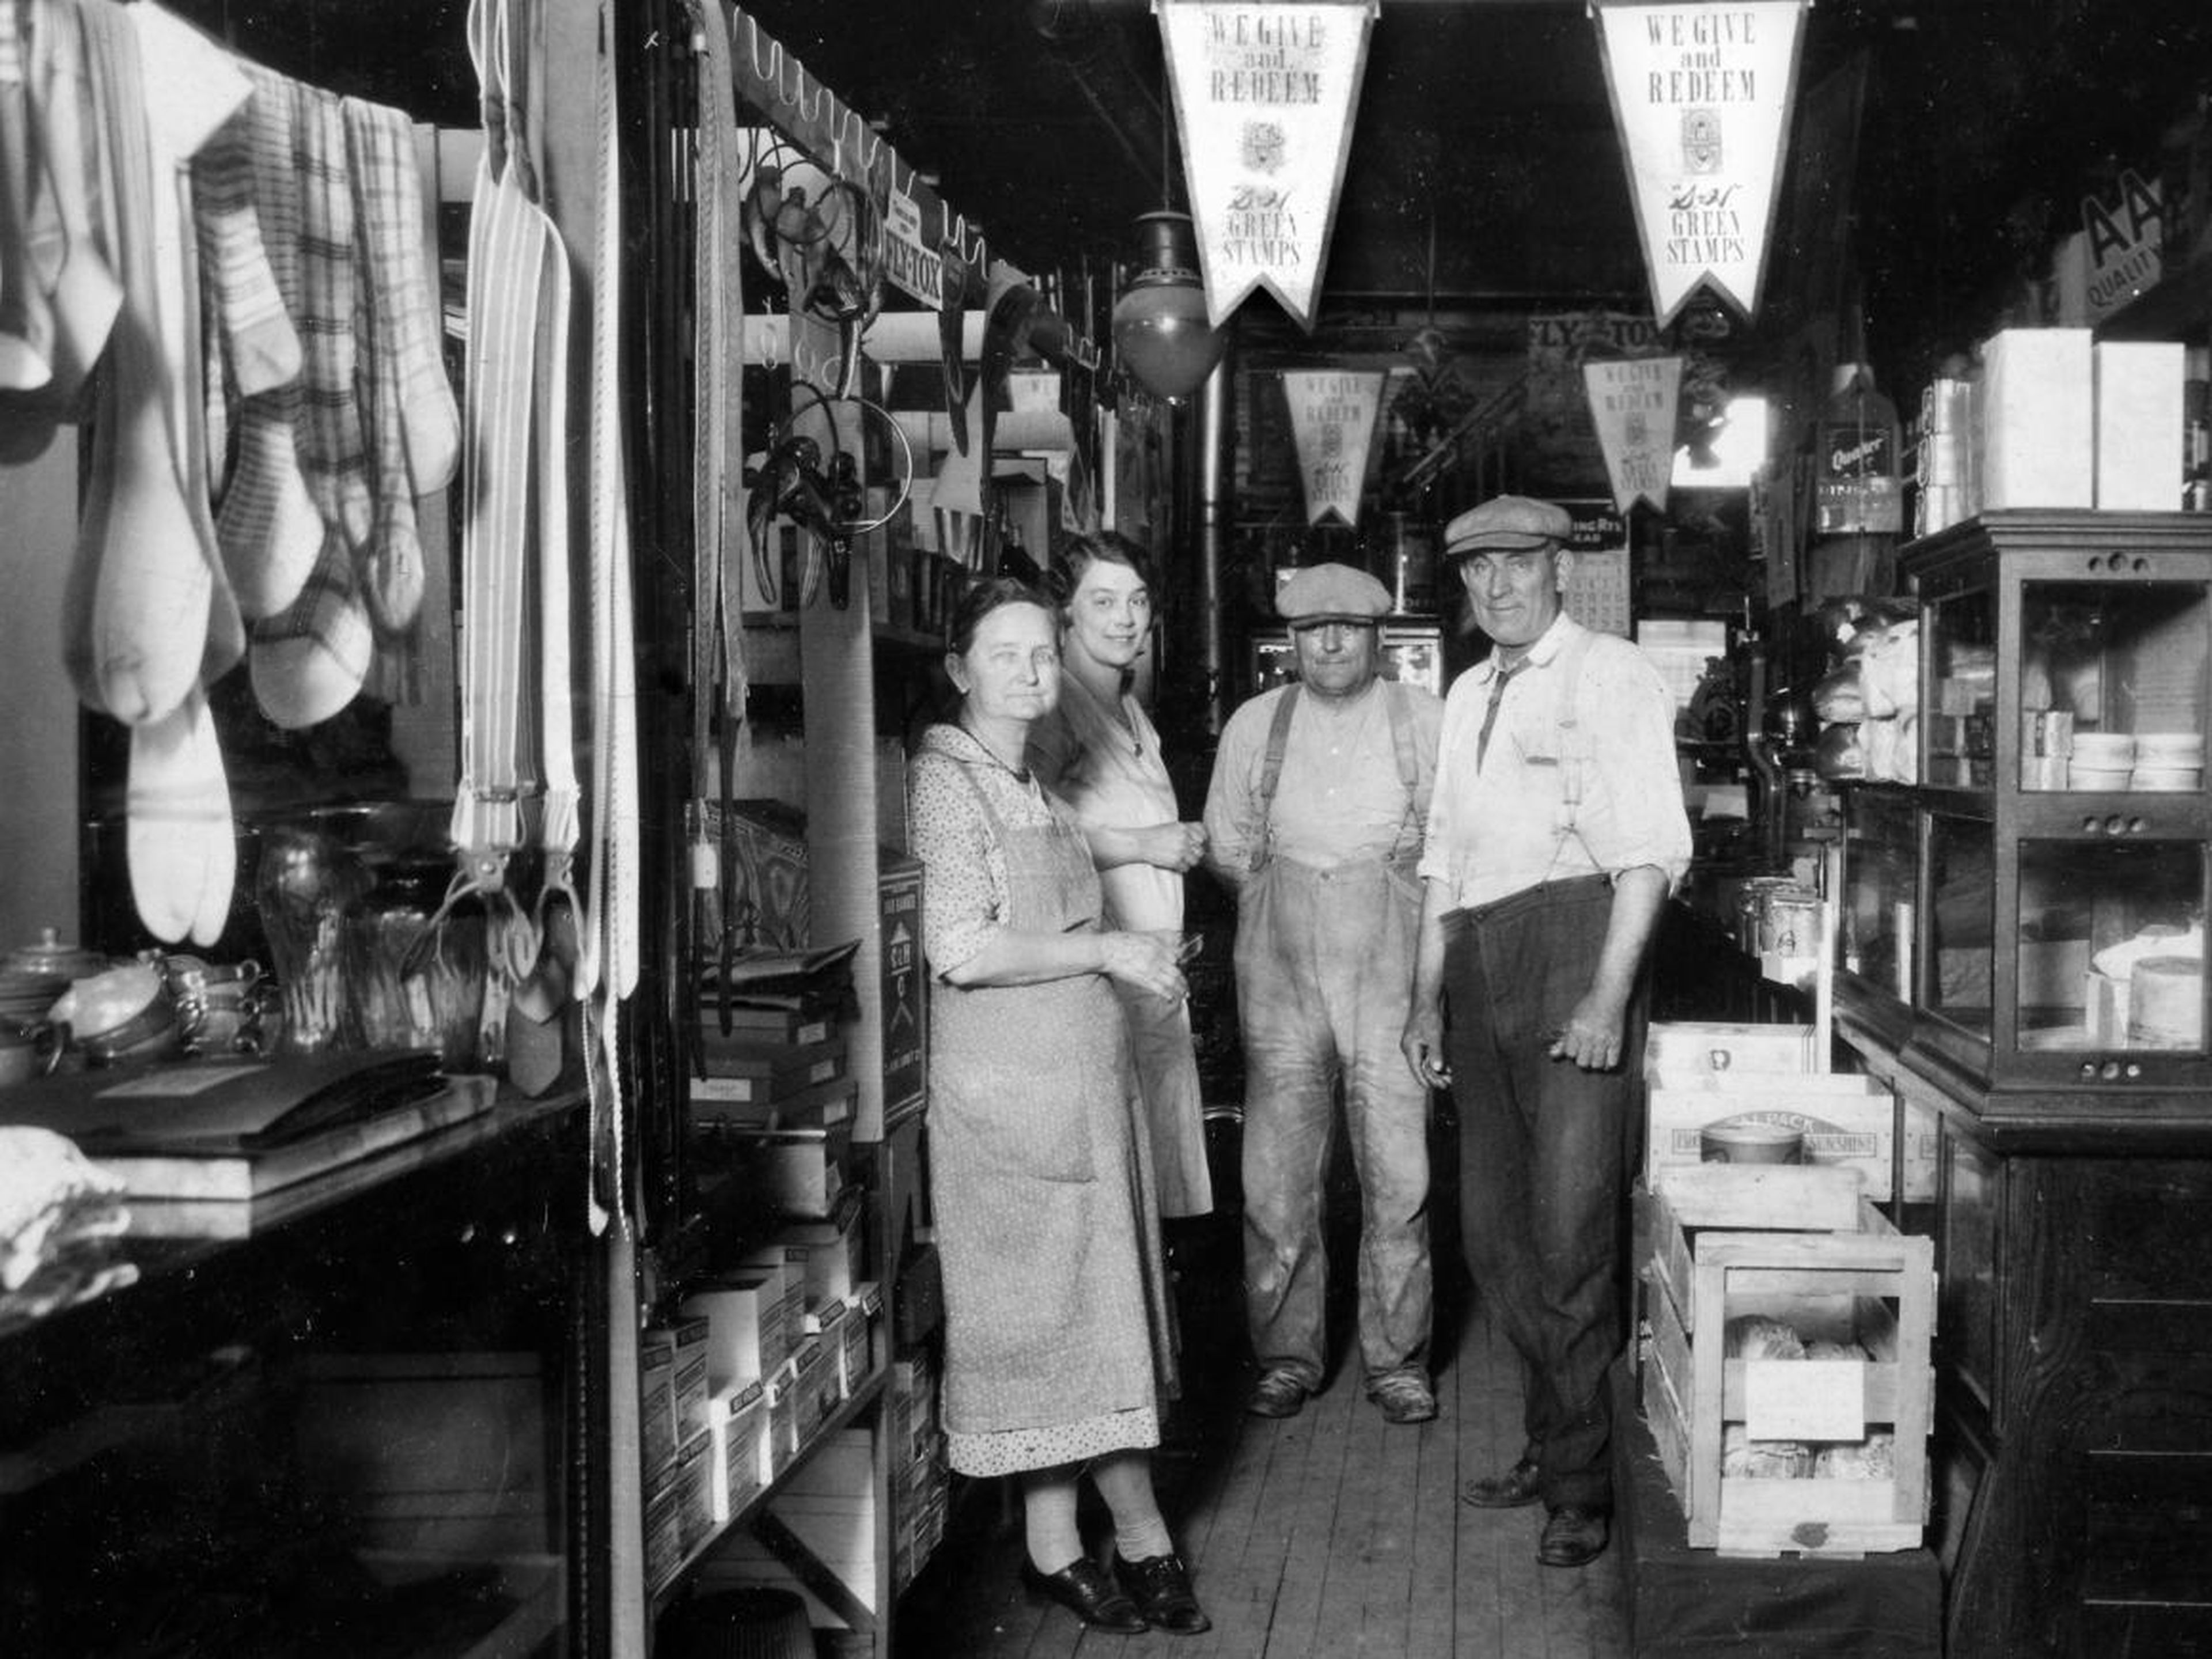 People in a general store.